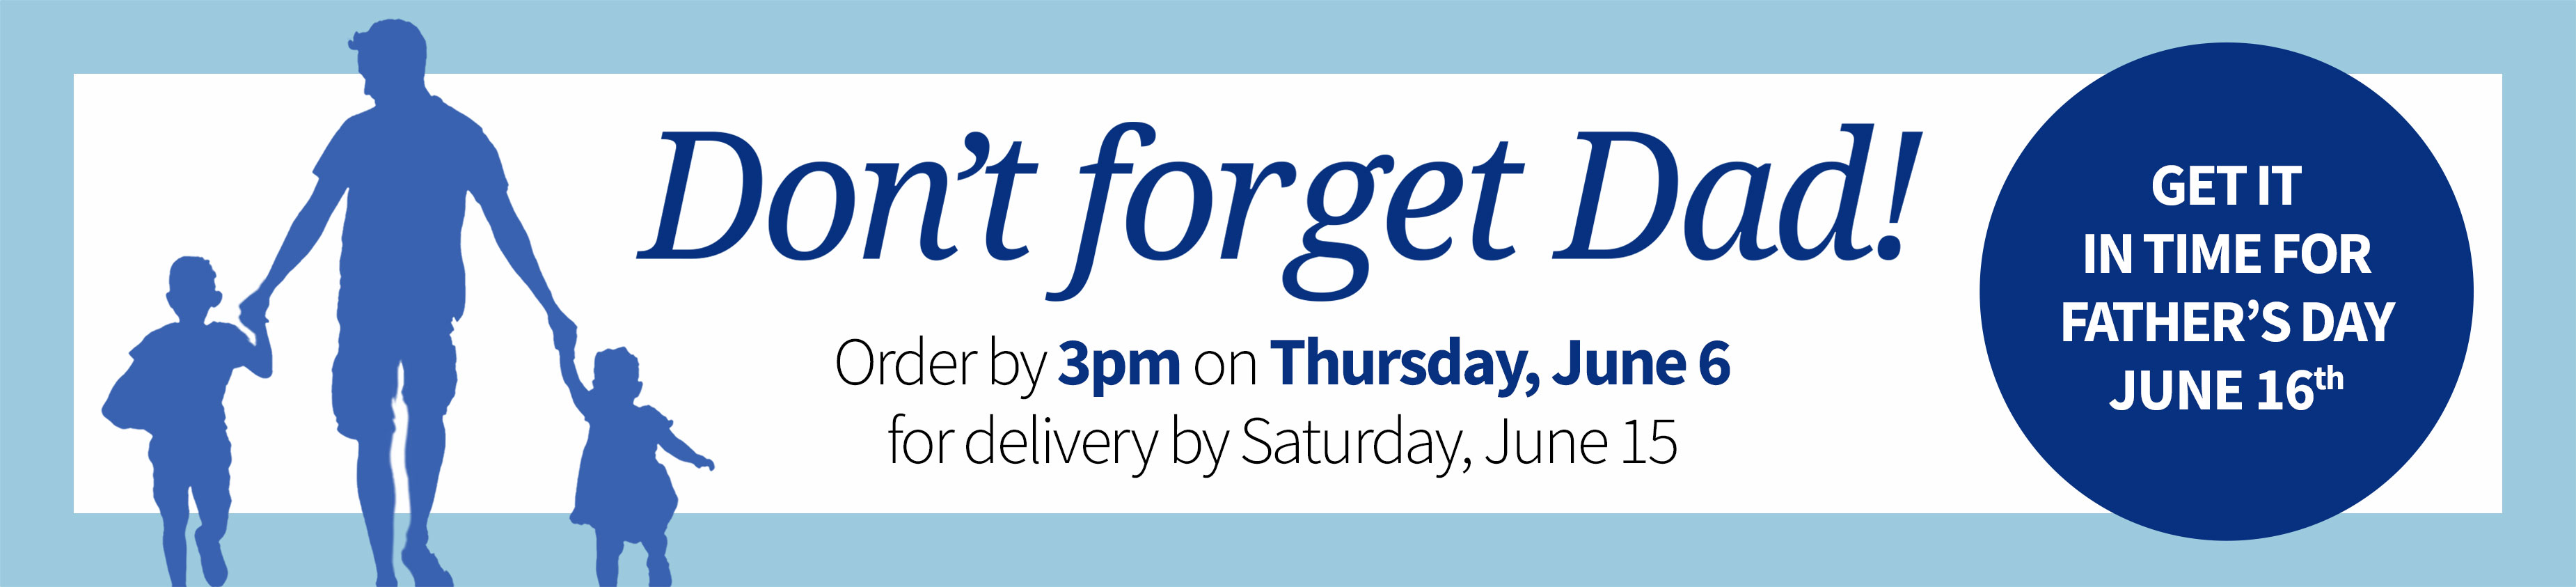 Don't forget dad. Order by 3pm Thursday June 6th.